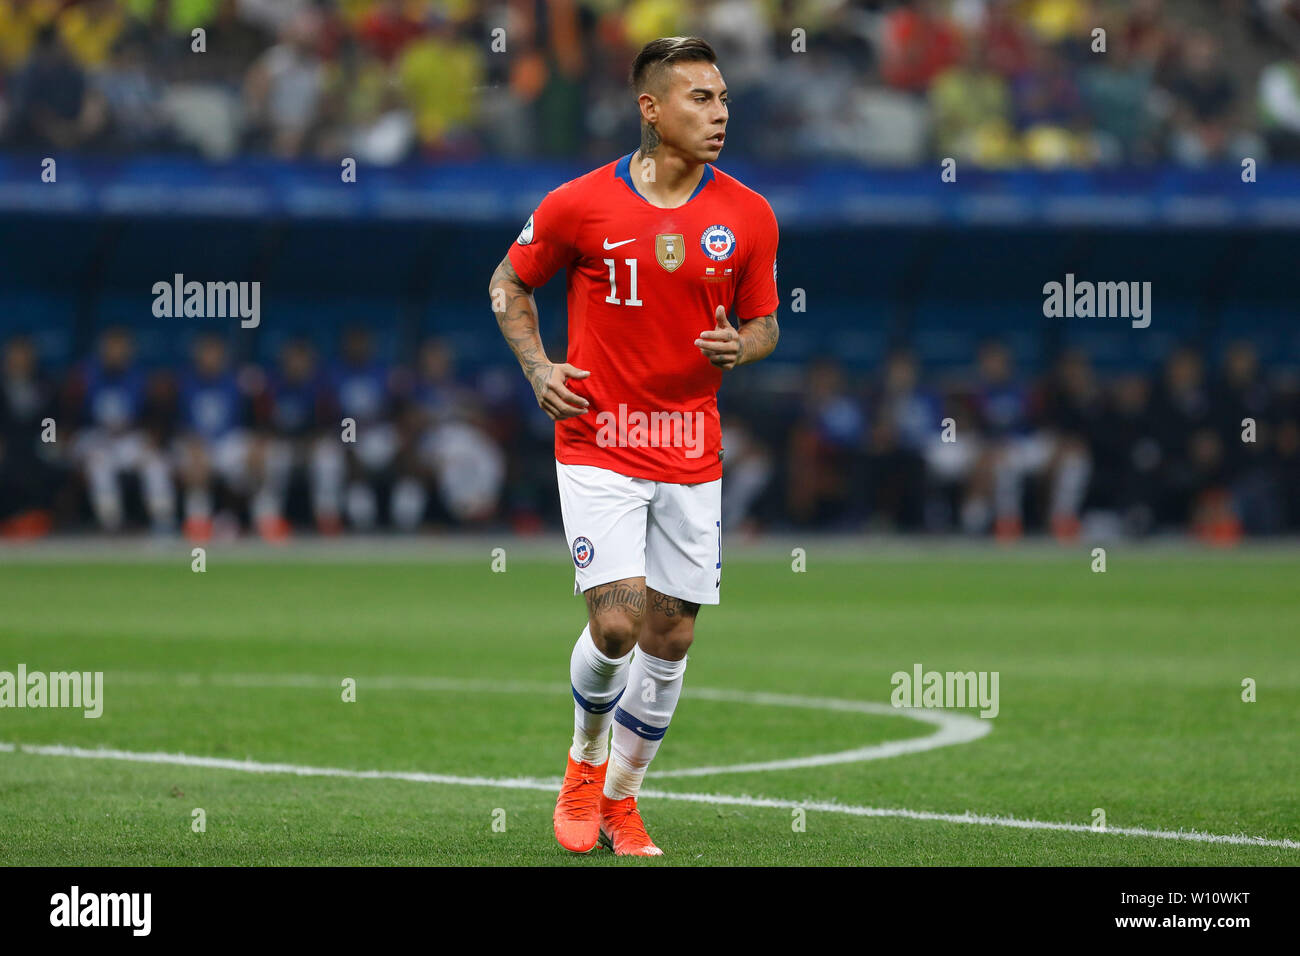 SÃO PAULO, SP - 28.06.2019: COLOMBIA VS. CHILE - Eduardo Vargas during a match between Colombia and Chile, valid for the quarterfinals of the Copa América 2019, held this Friday (28) at the Corinthians Arena in São Paulo, SP. (Photo: Ricardo Moreira/Fotoarena) Stock Photo